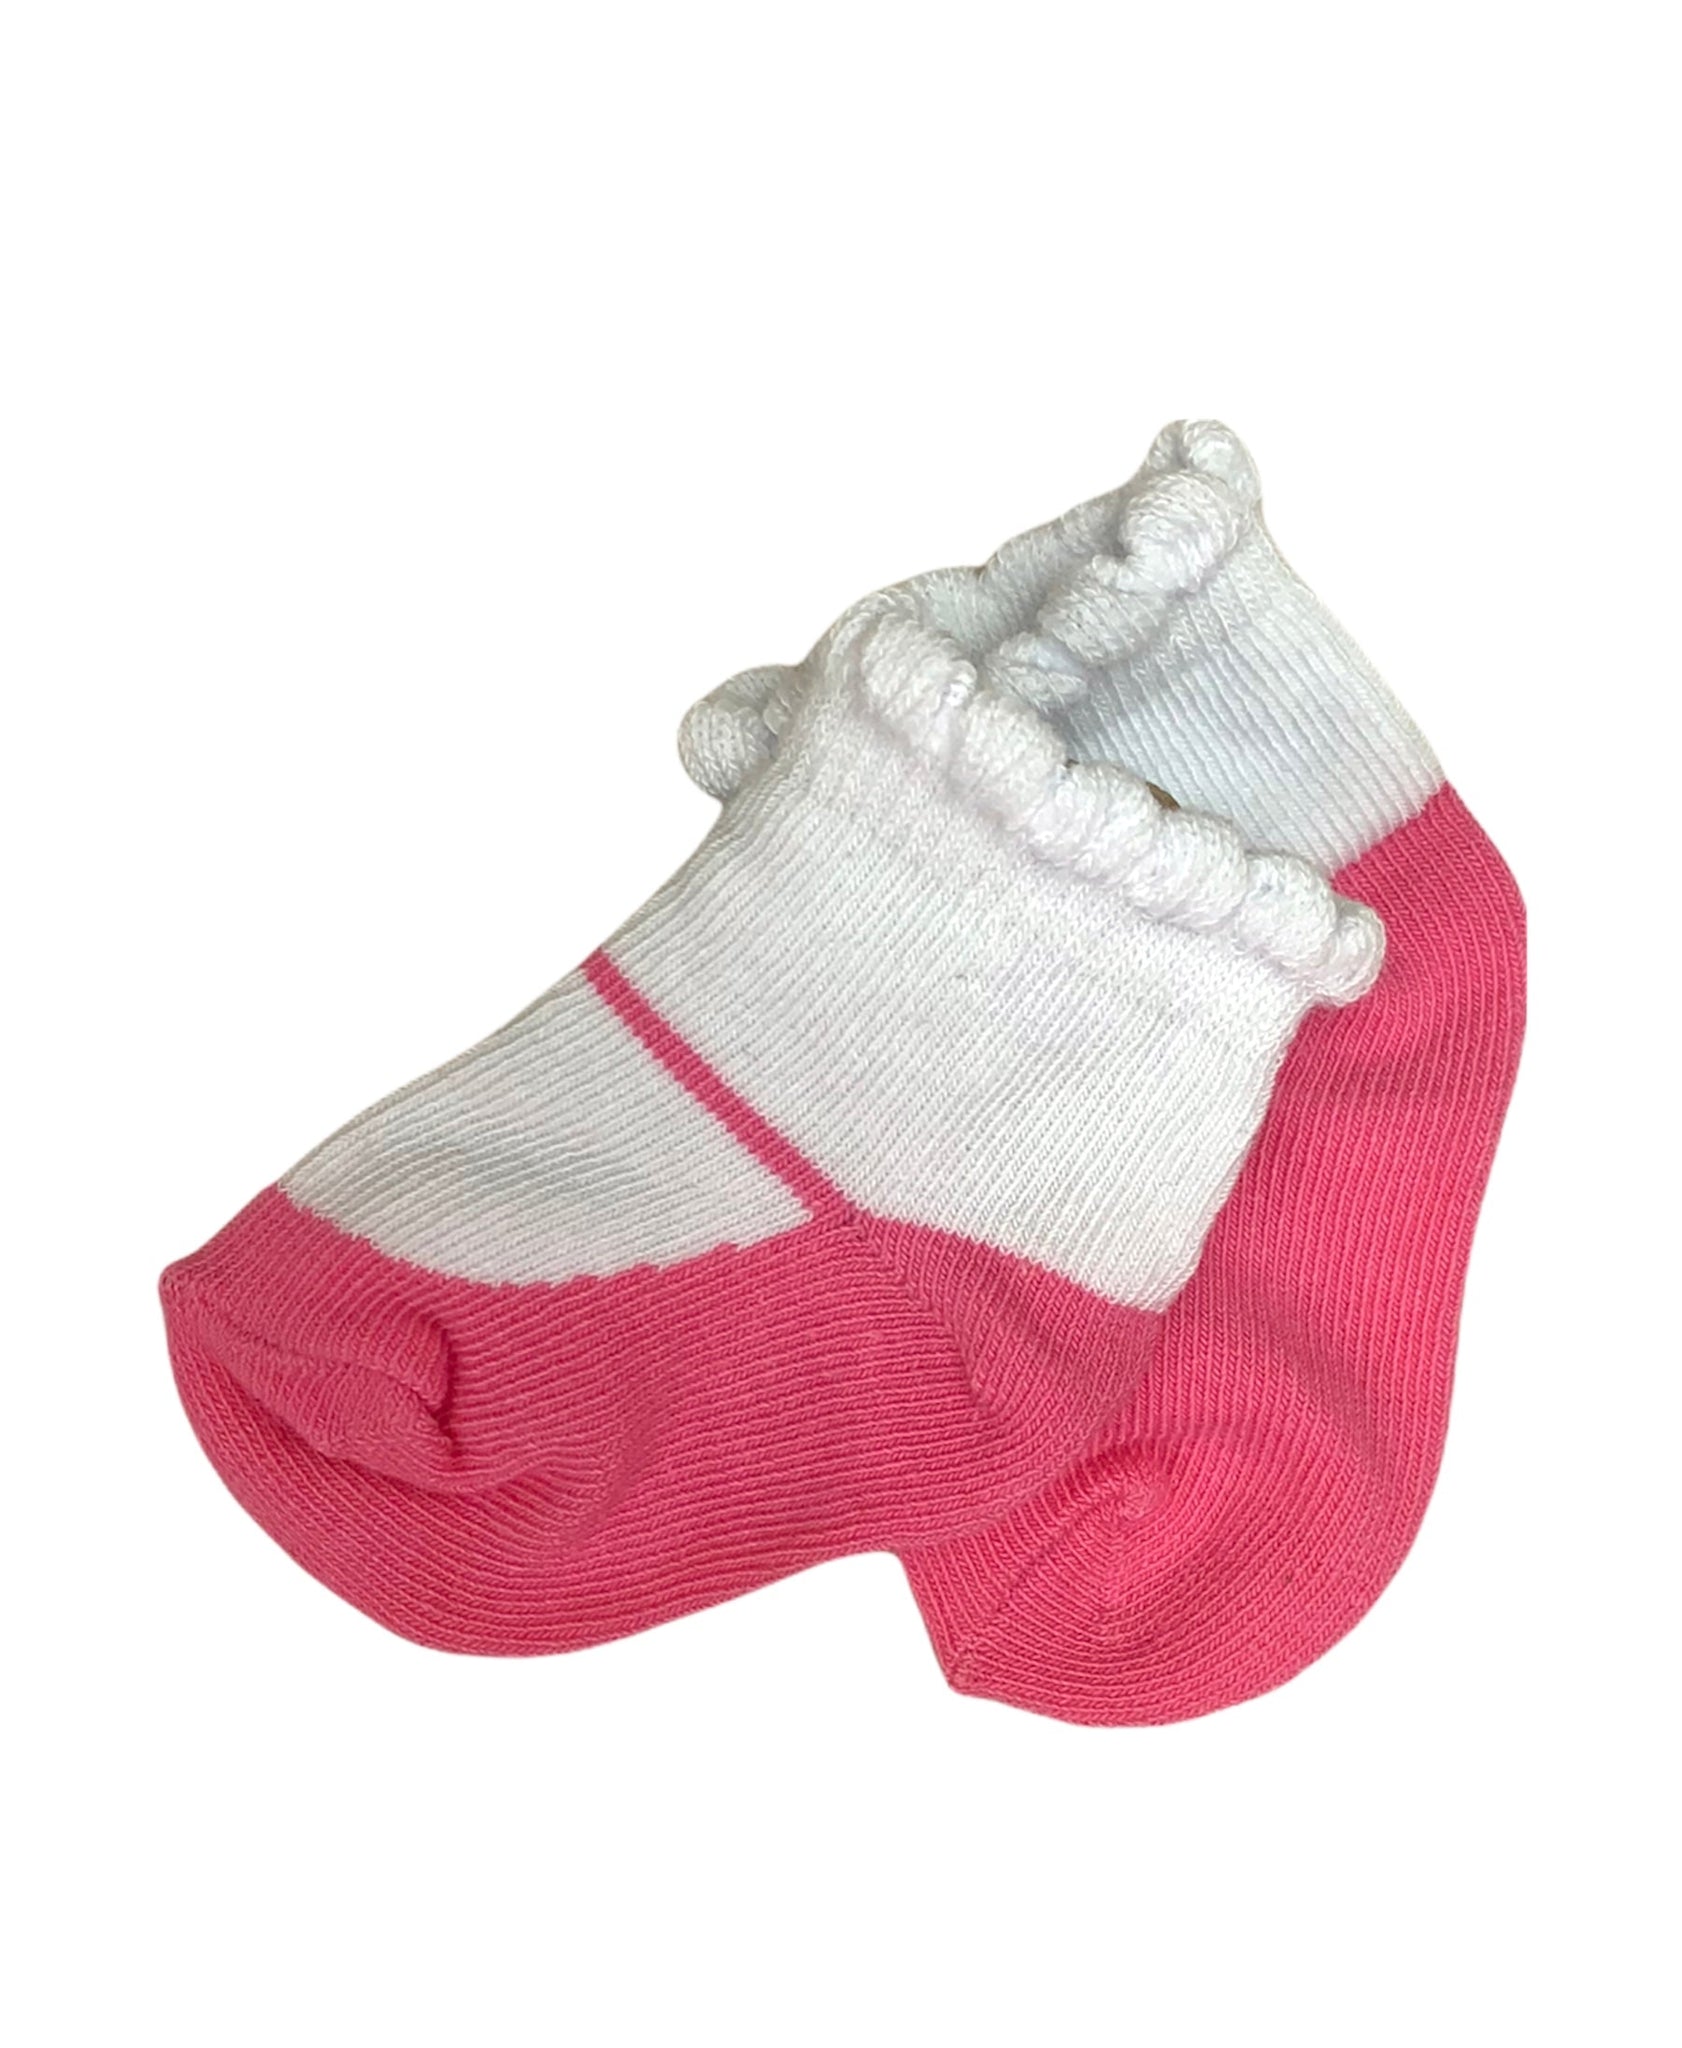 white socks with pink Mary Jane shoe design